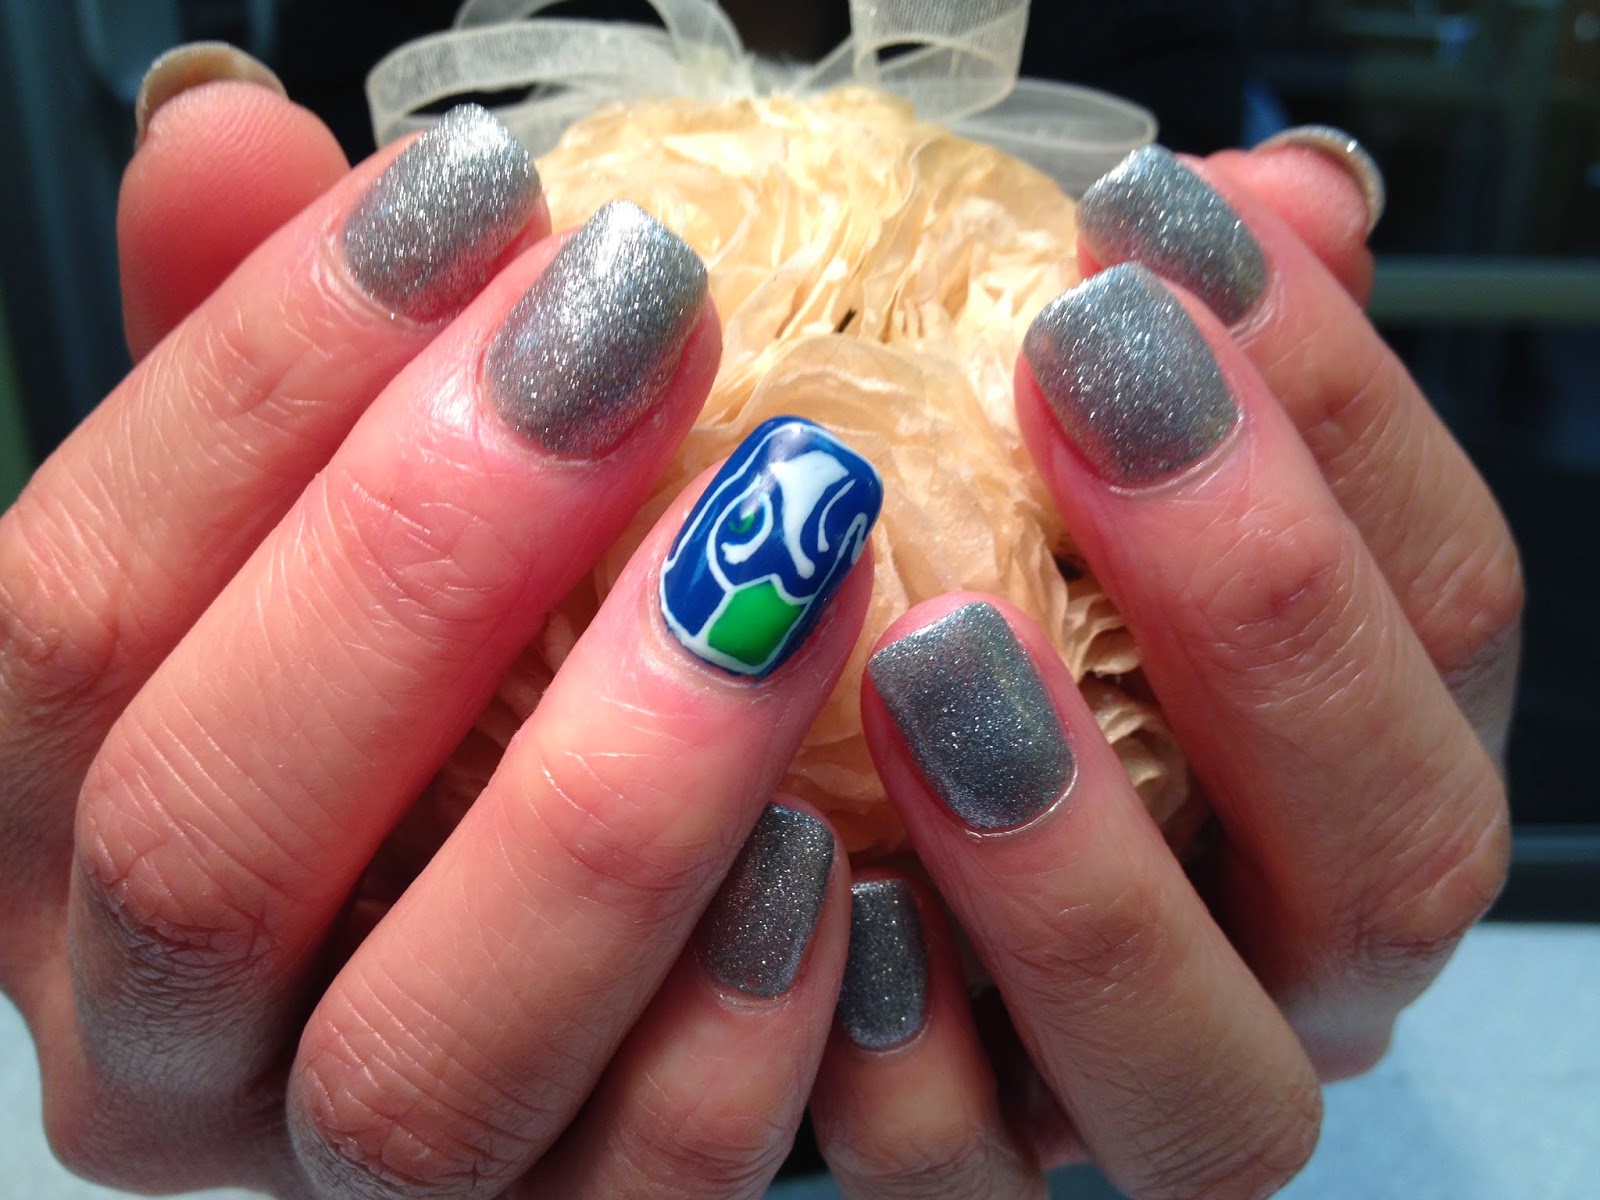 2. Seattle Seahawks Nail Designs for Super Bowl - wide 4